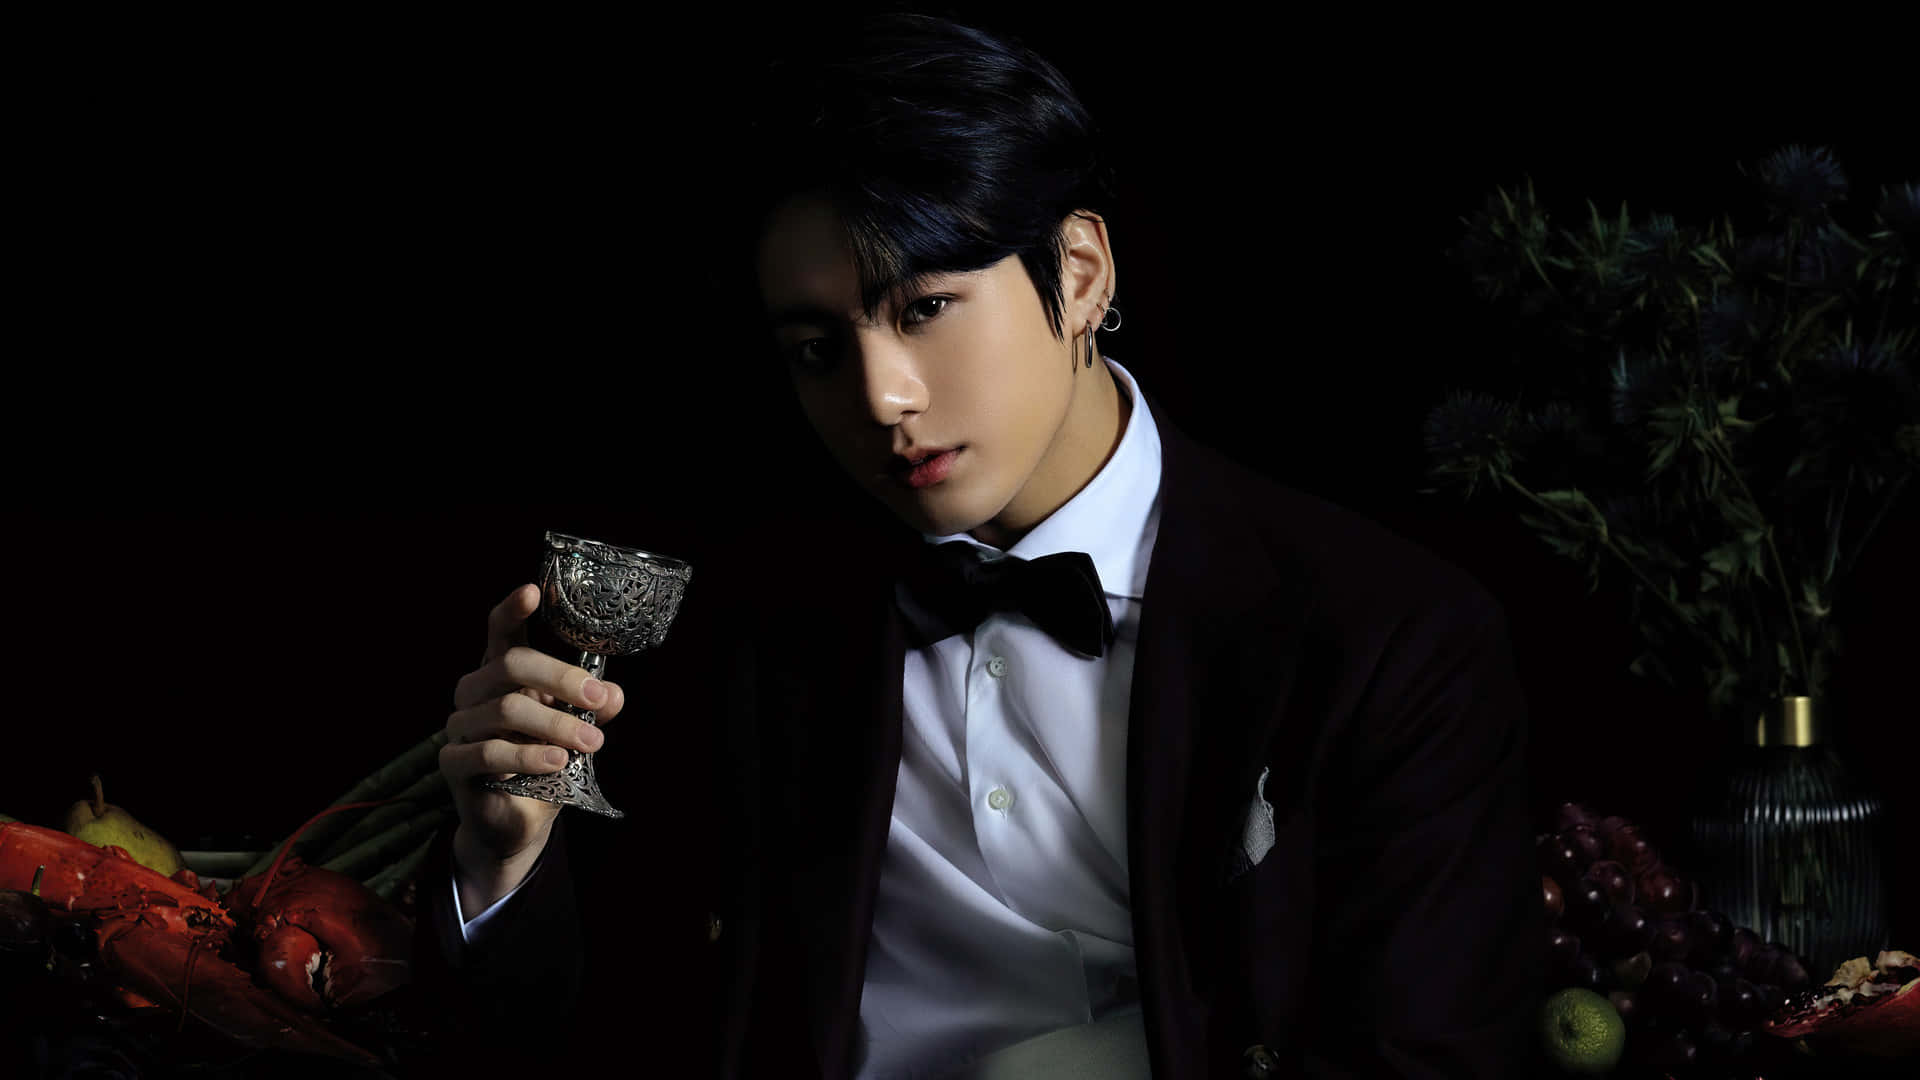 A Man In A Suit Holding A Glass Of Wine Wallpaper